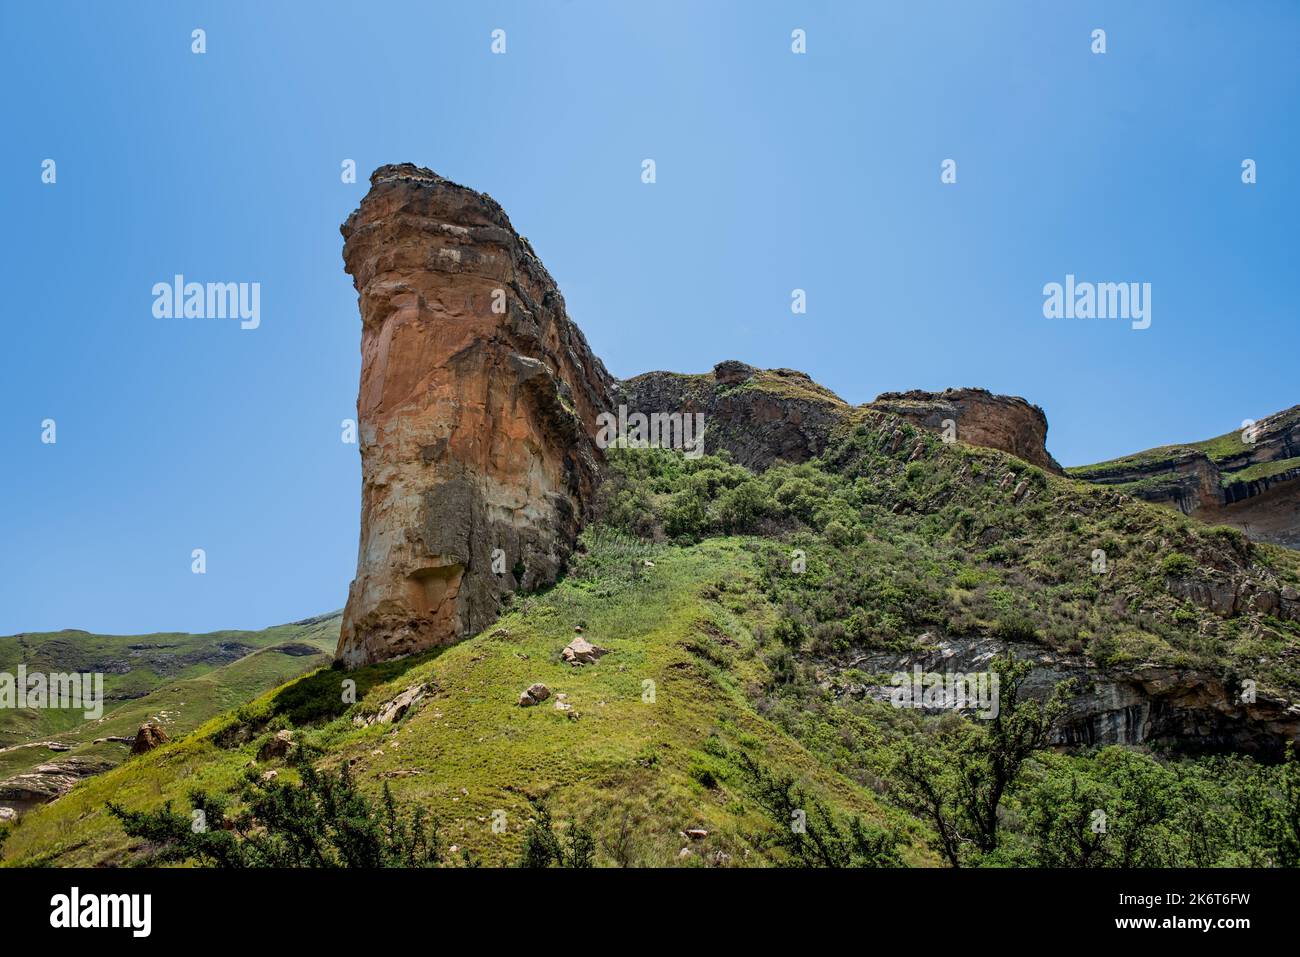 The Brandwag Buttress (Sentinel) in Golden Gate Highlands National Park, a nature reserve belonging to the Drakensberg mountain range in South Africa. Stock Photo